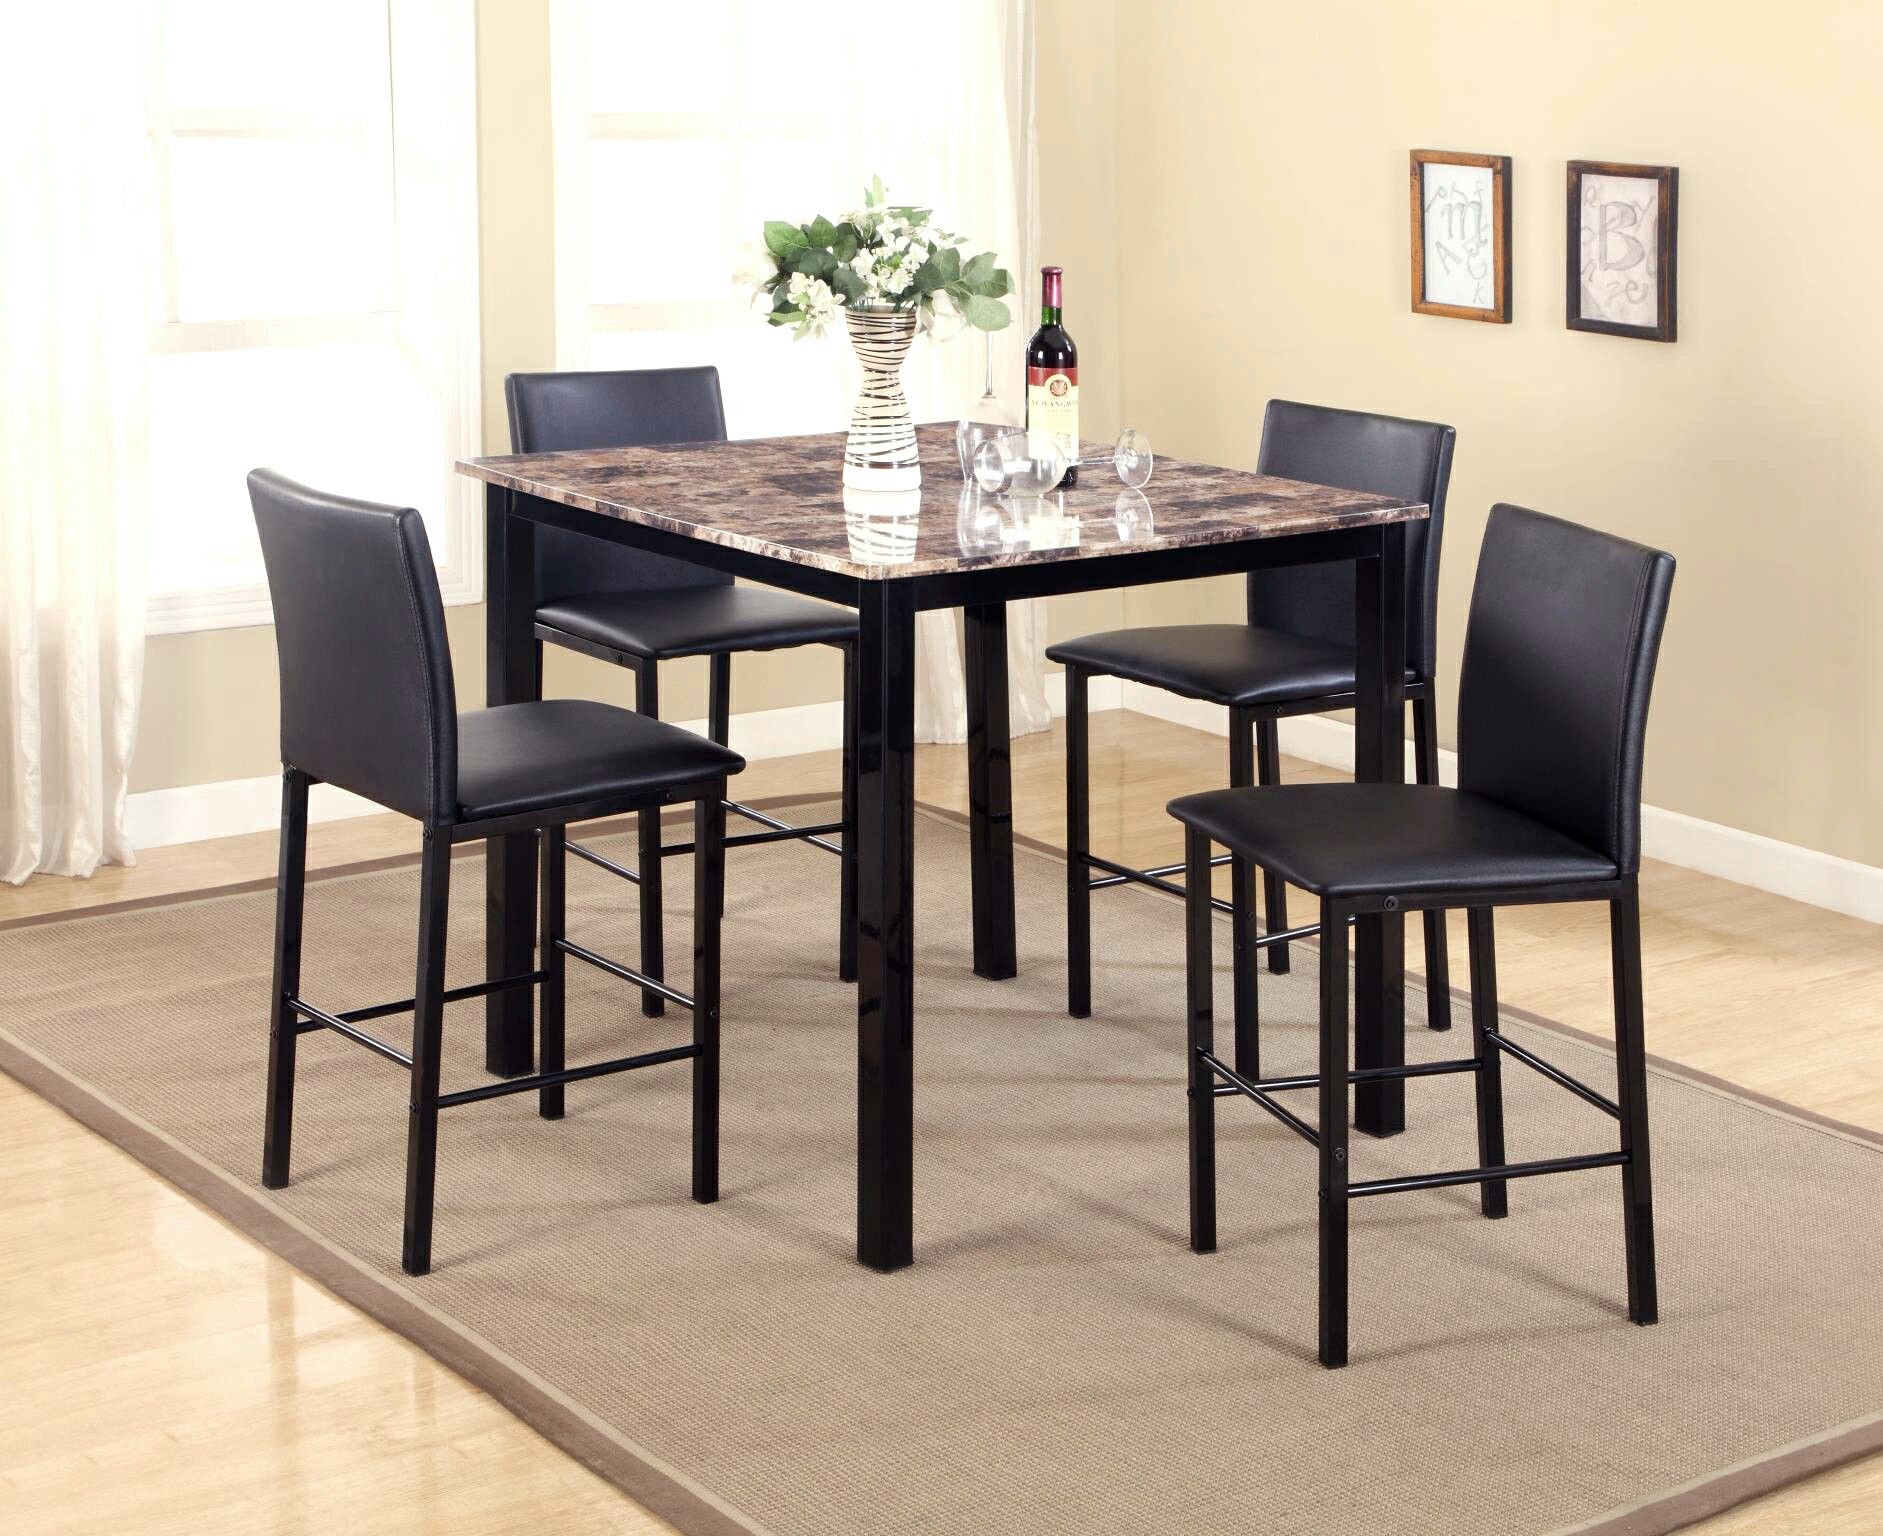 Counter height dining table when 4 chairs new why free shipping